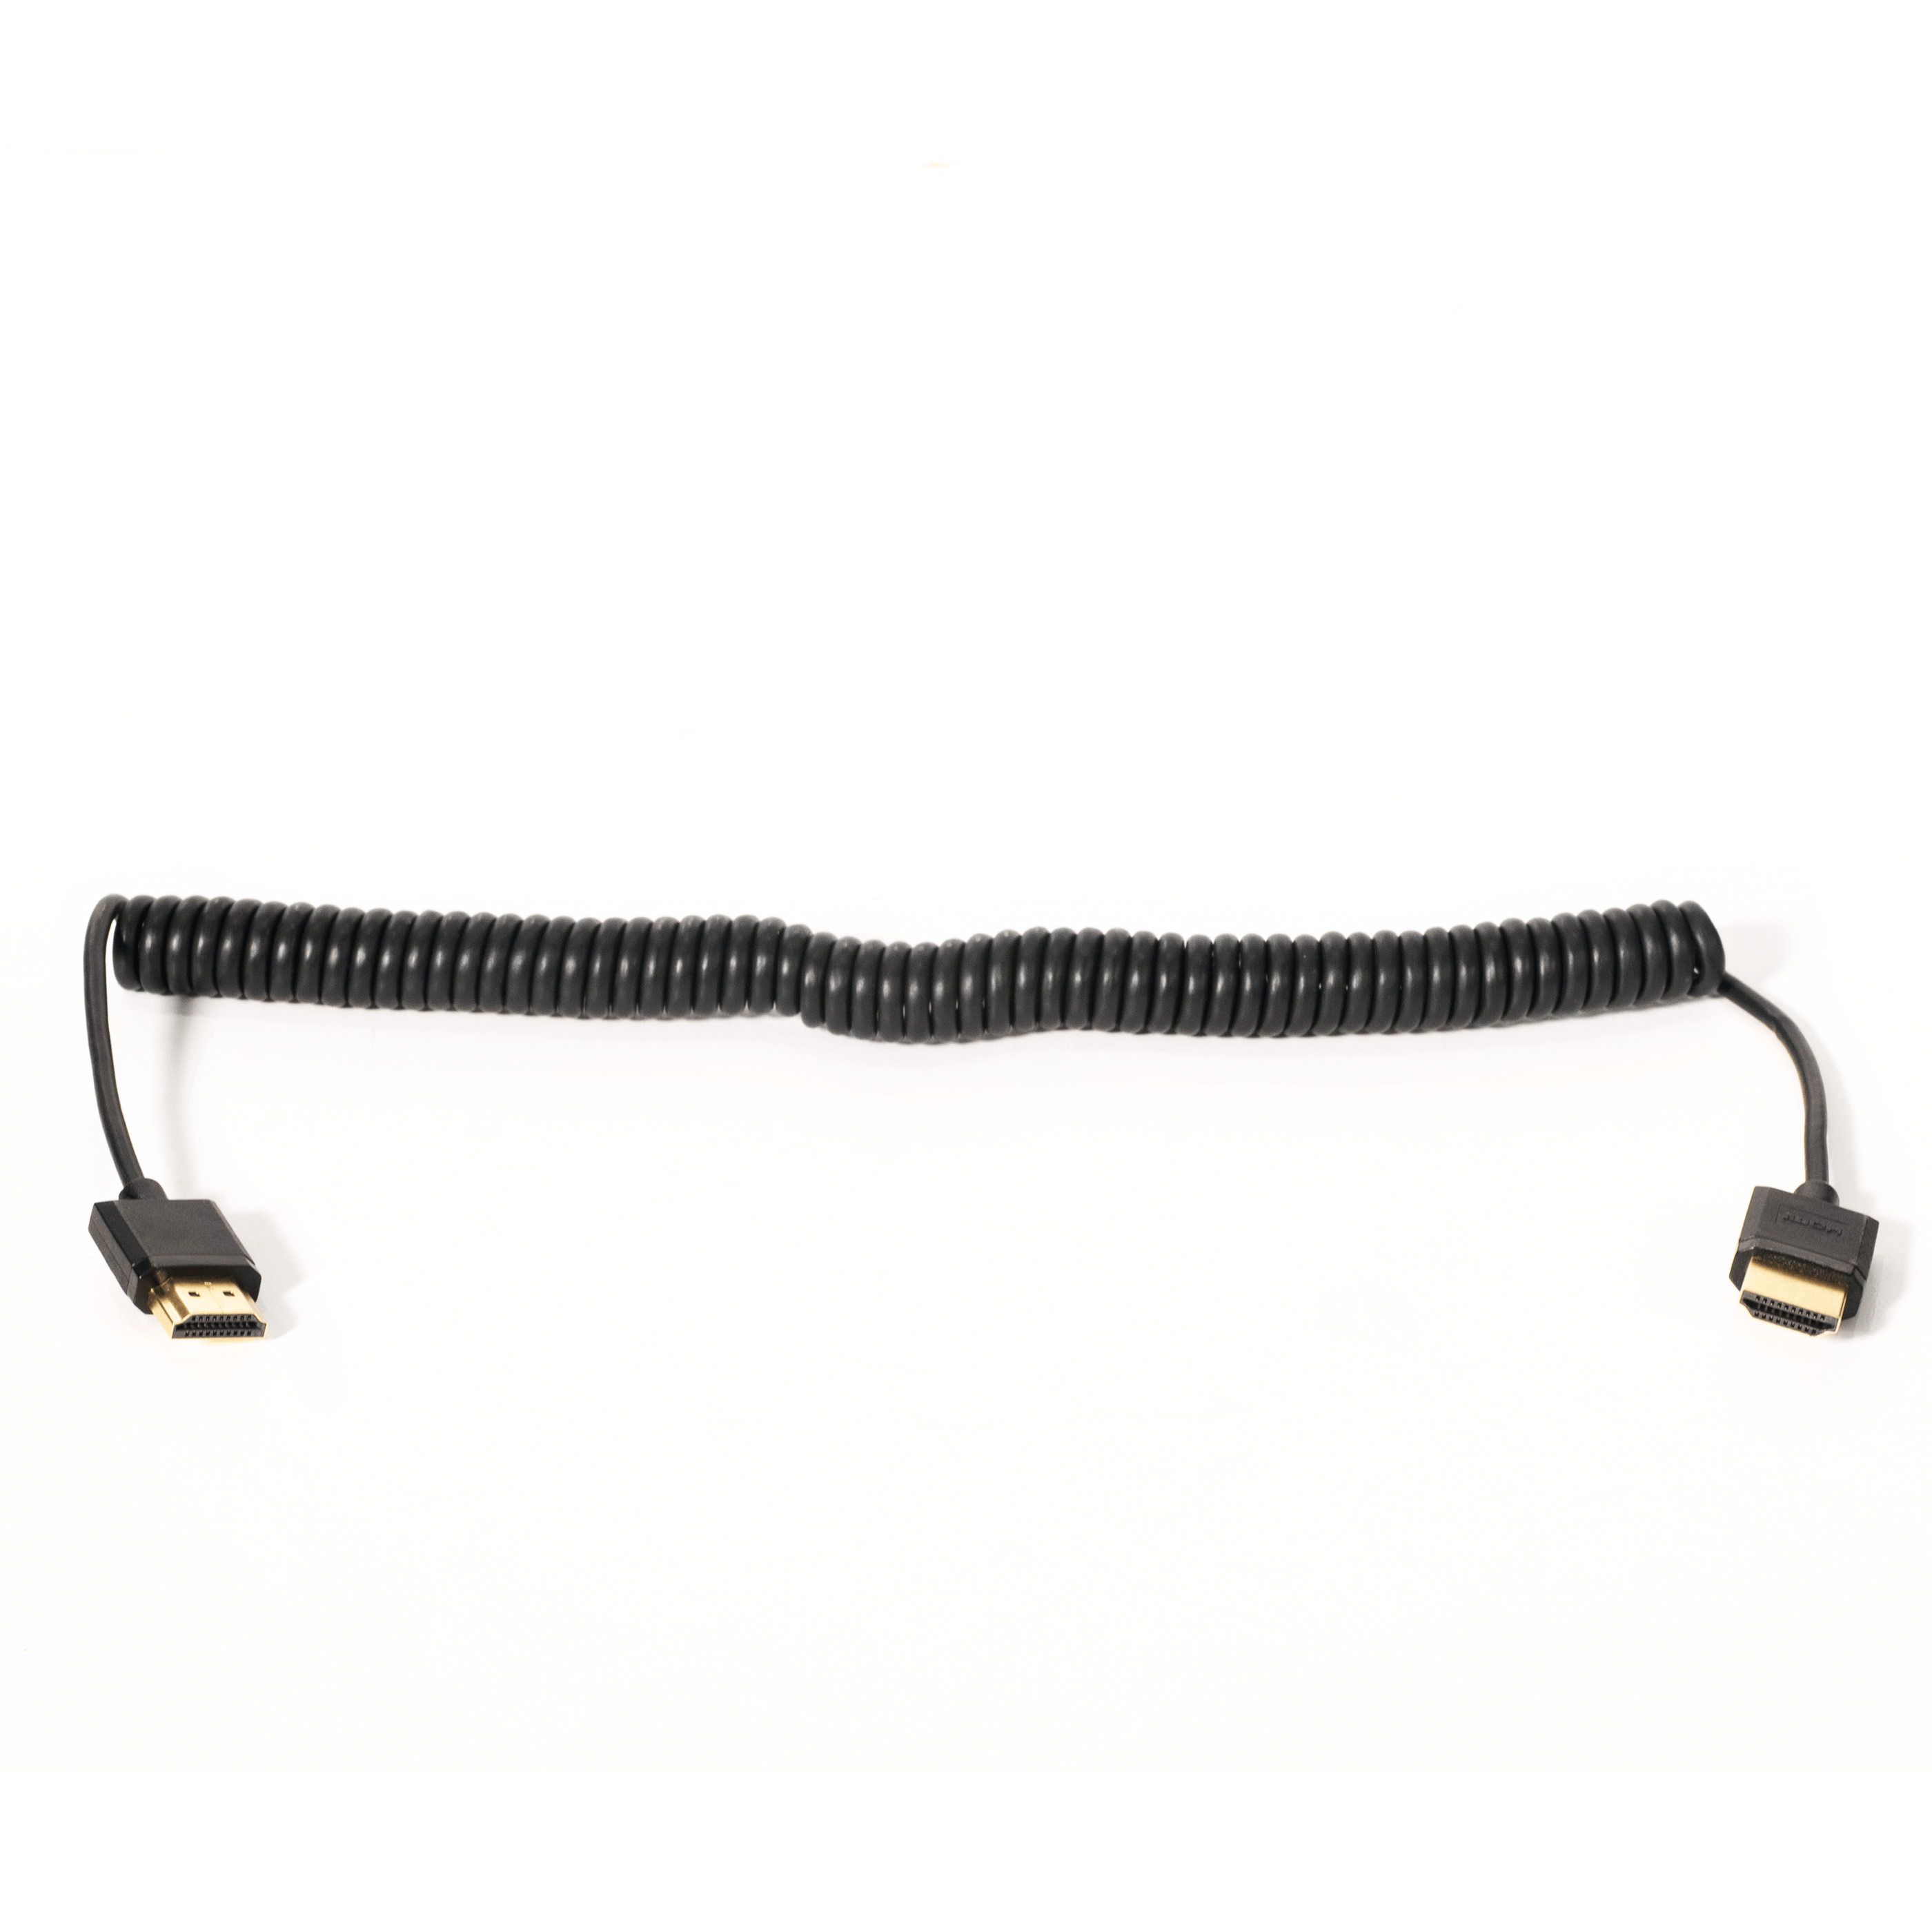 16 in - 8 ft Coiled Full-size HDMI Cable - 4K Standard HDMI (Type A) Full to Full